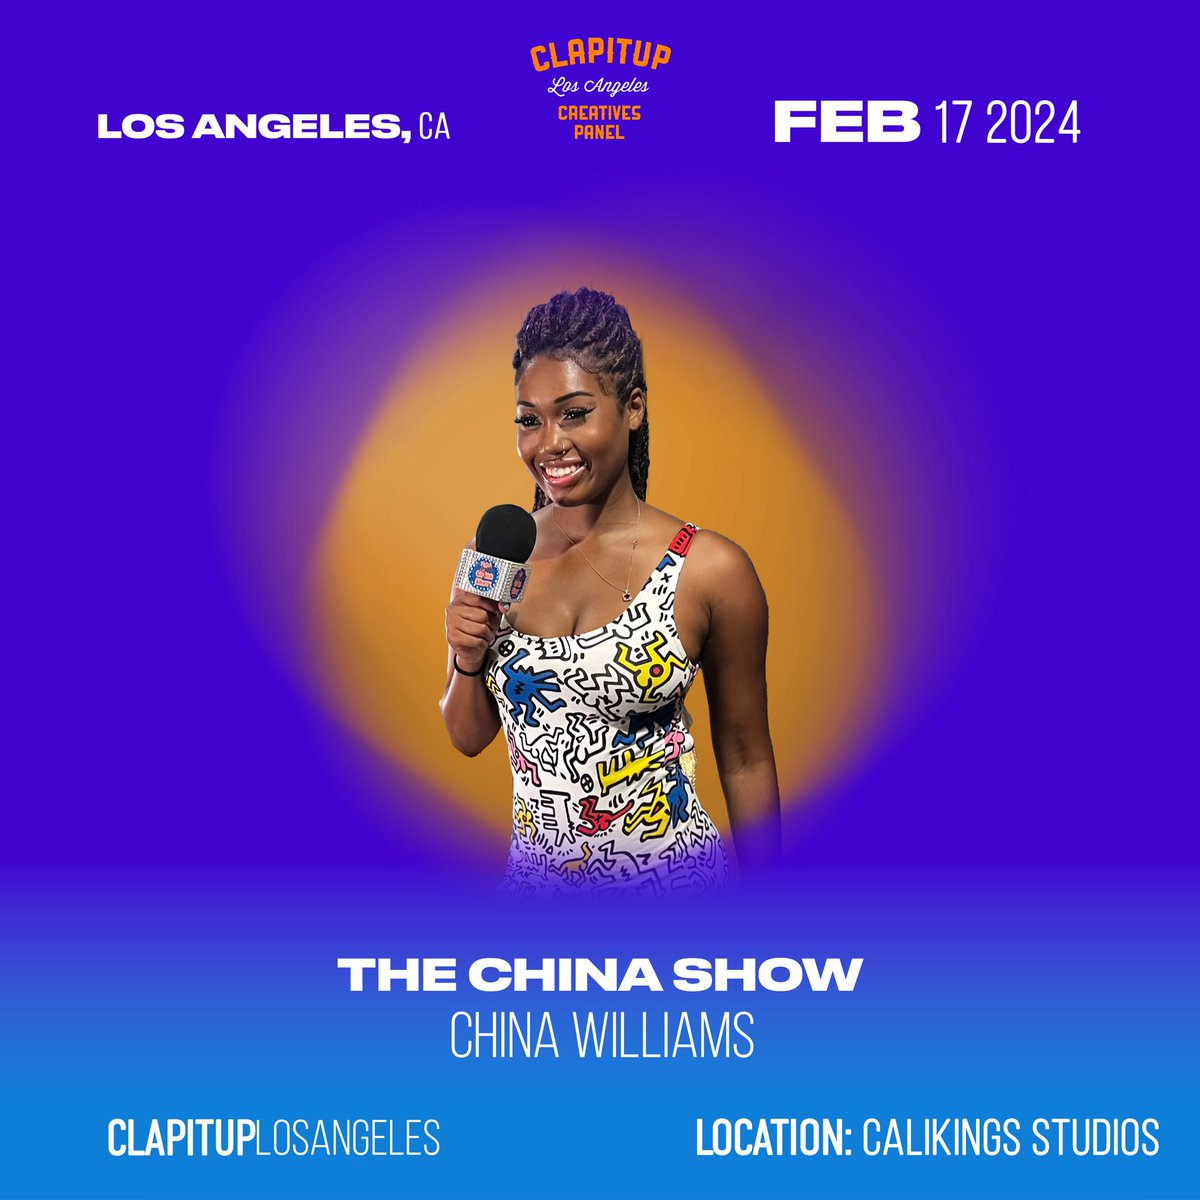 SATURDAY catch your favorite interviewer @chinatokyojapan of the @thechinashow on the @clapitupla creatives panel CLICK LINK FOR TICKETS eventbrite.com/e/clap-it-up-l…